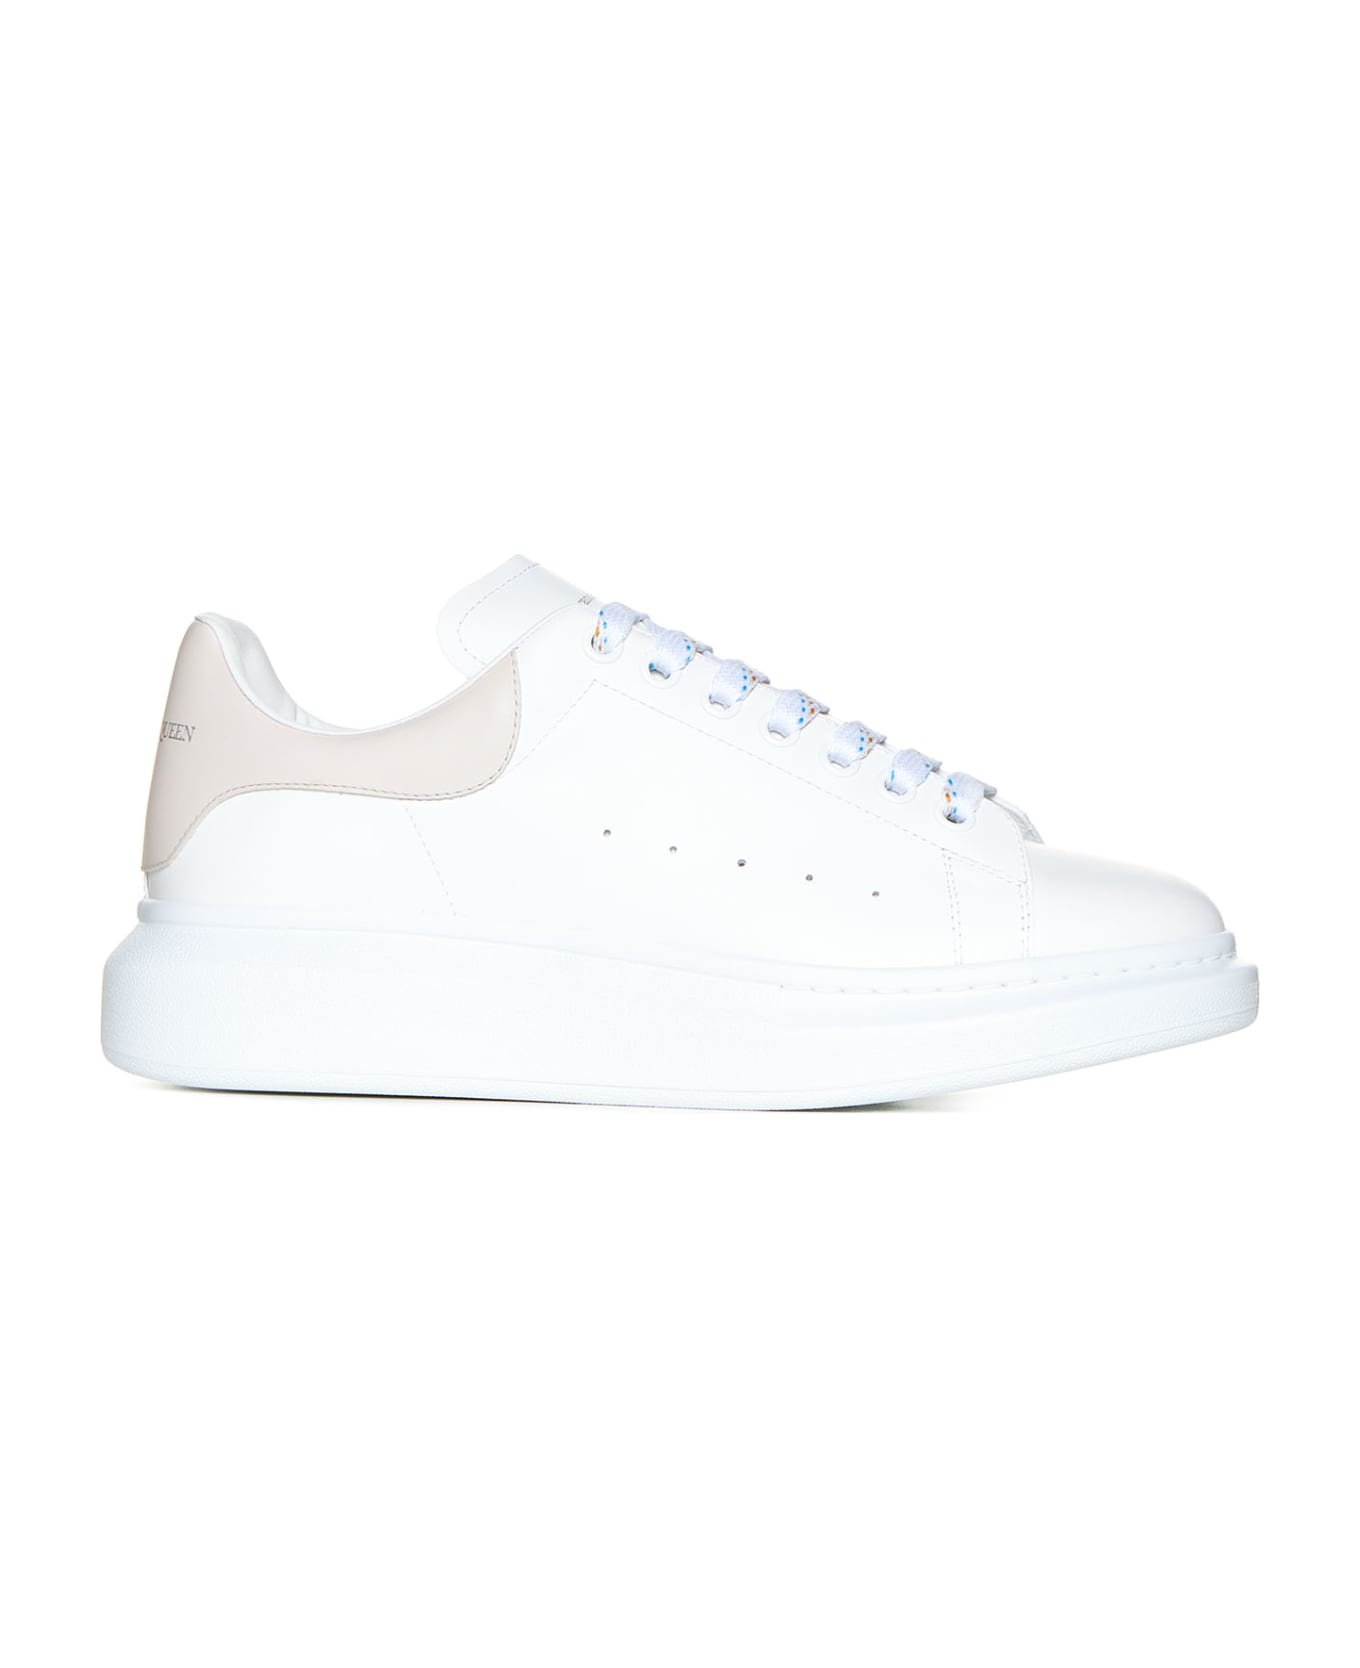 Alexander McQueen Lace-up Low Top Sneakers - White